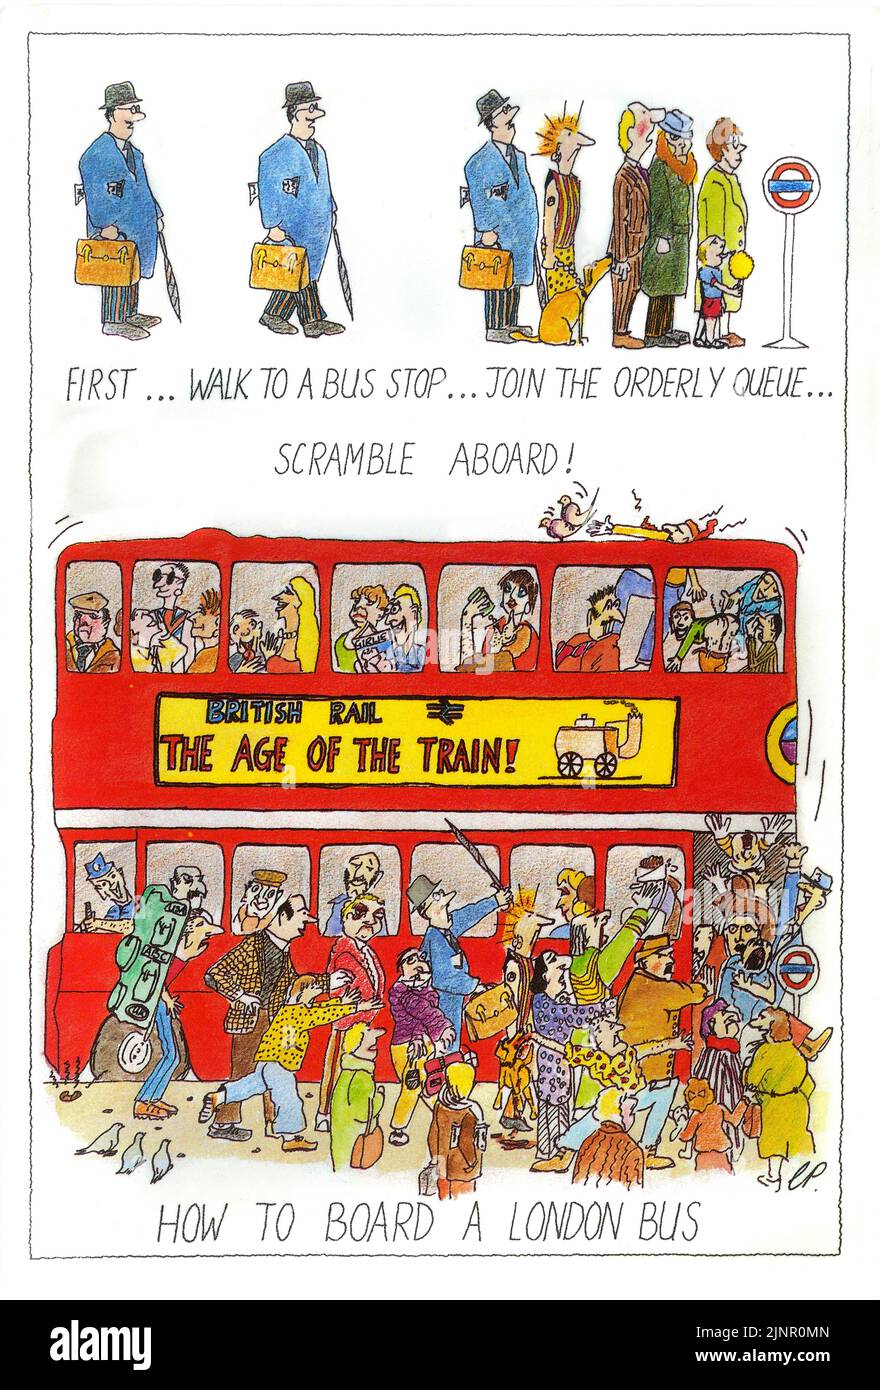 How to board a London bus.1980's amusing funny London postcard. By Chris Parker Stock Photo